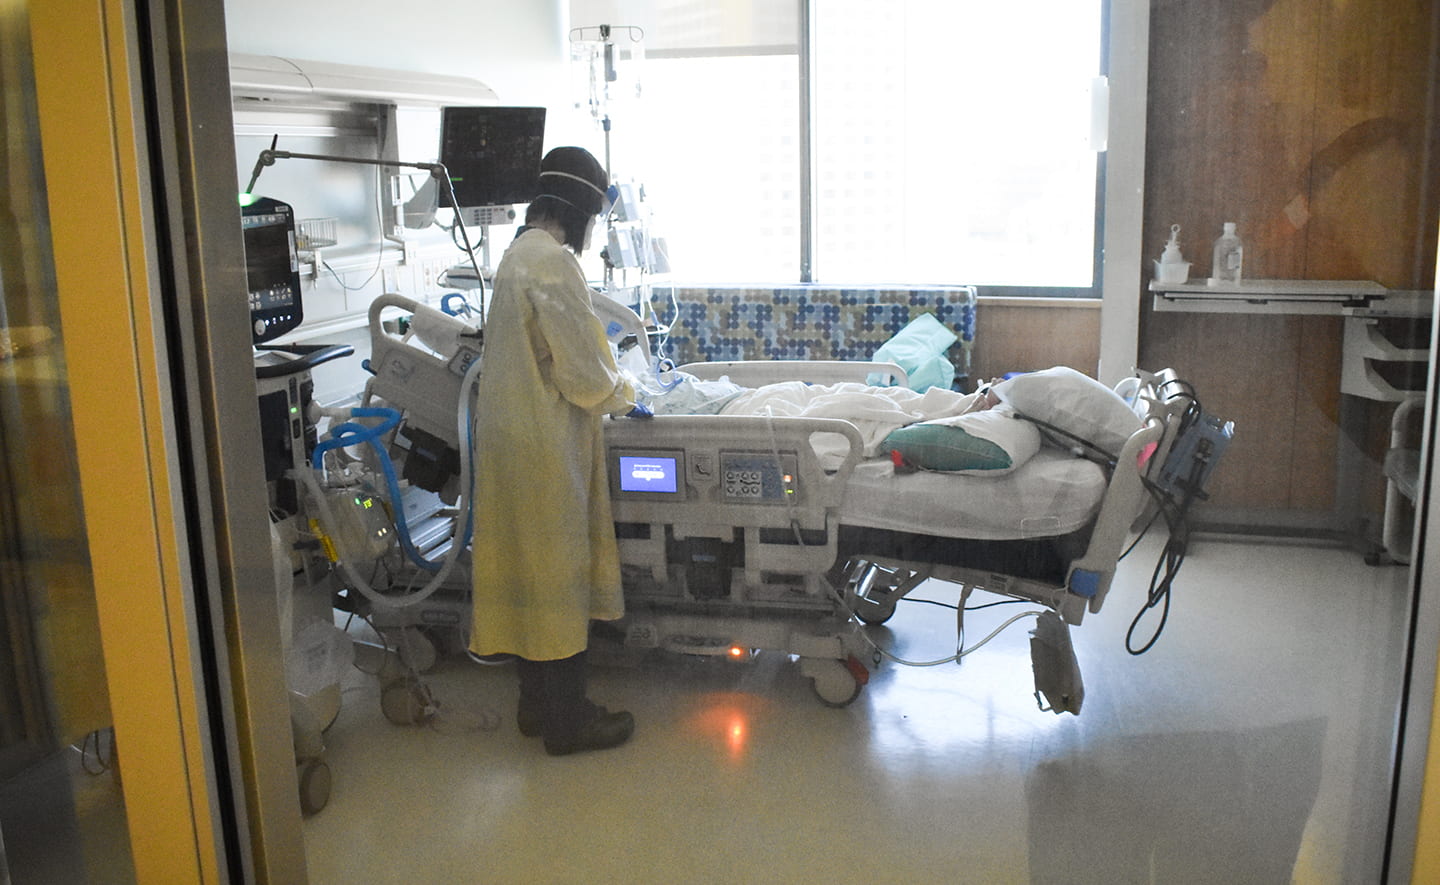 Nurse attending to a patient in a hospital room.